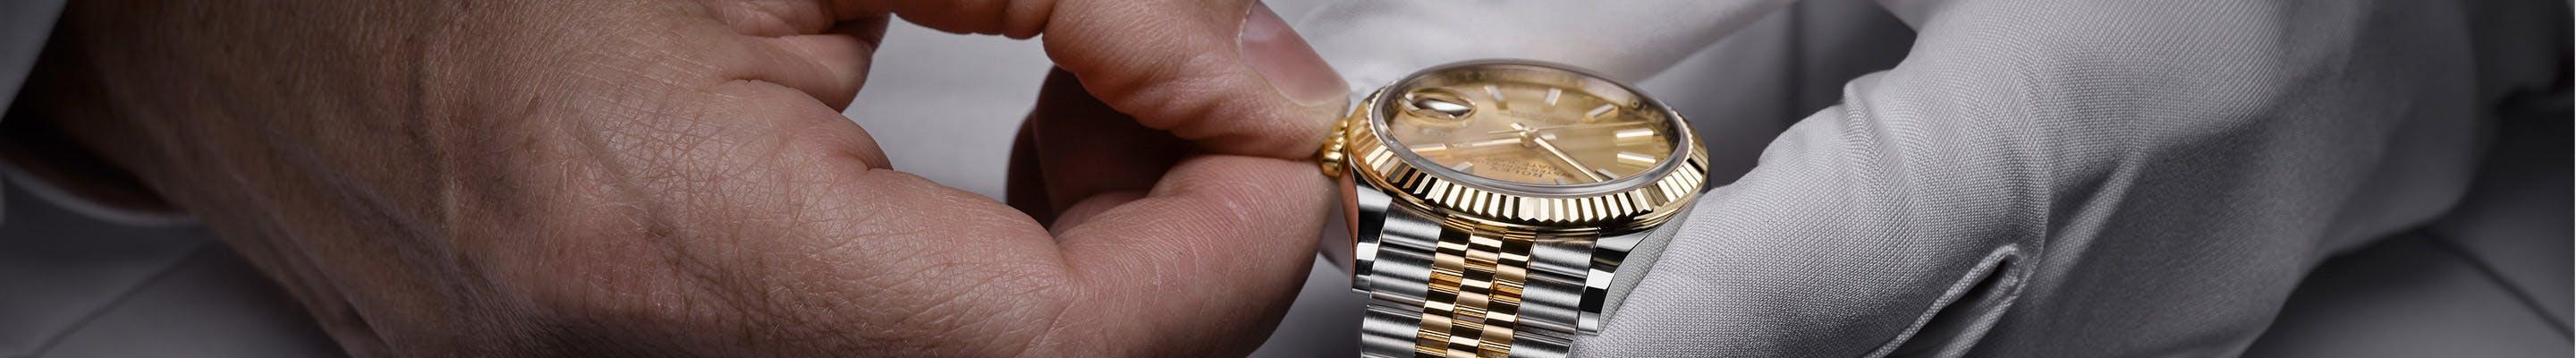 Rolex watch servicing at Lee Michaels Fine Jewelry stores